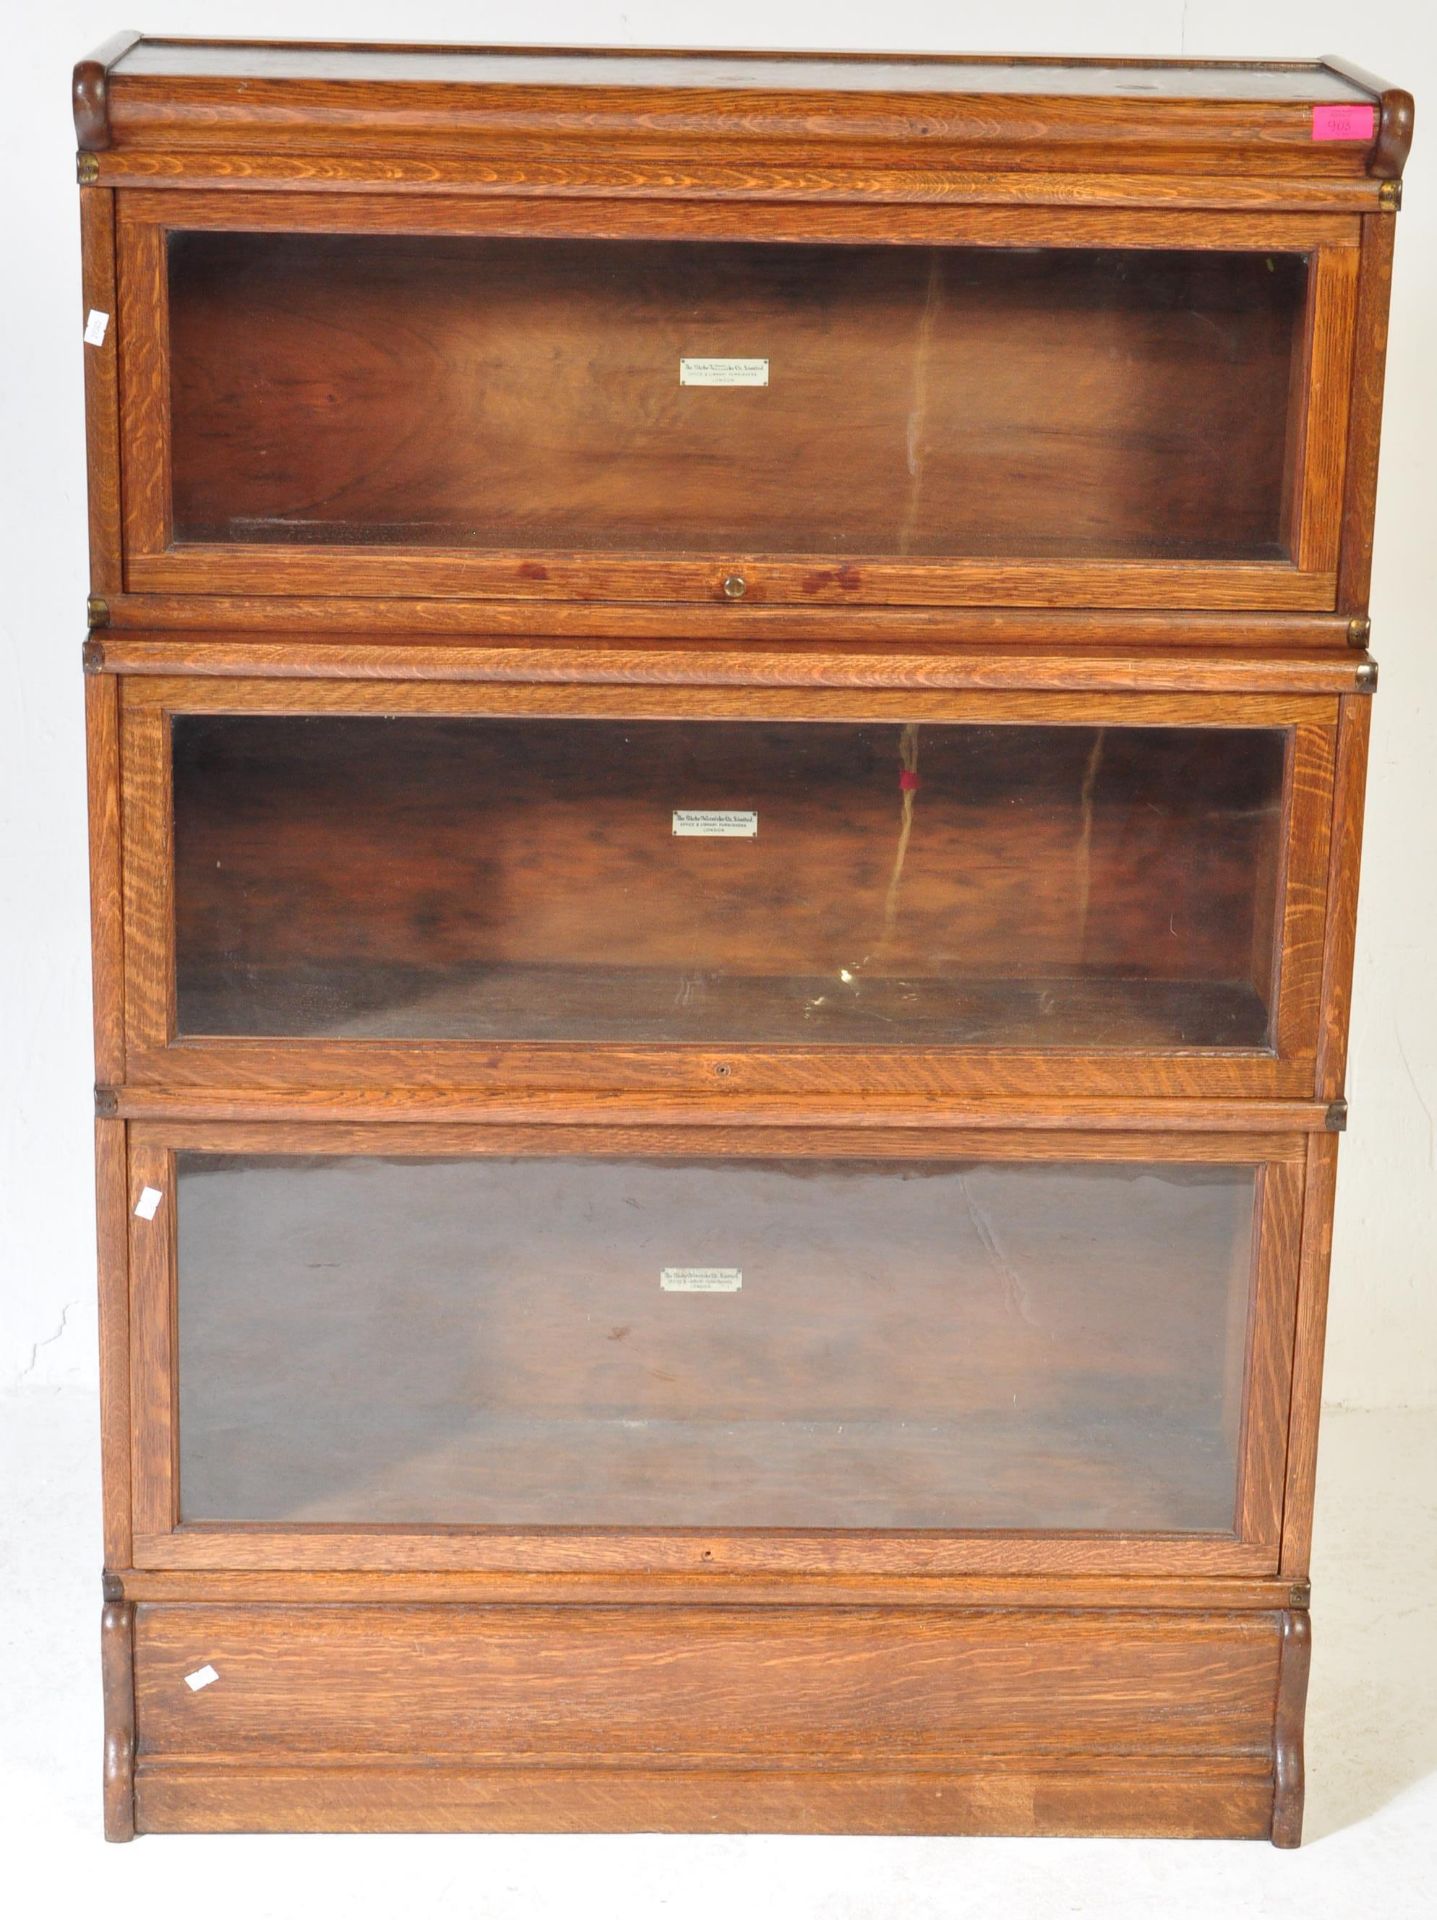 GLOBE WERNICKE - EARLY 20TH CENTURY LAWYERS BOOKCASE - Image 2 of 8